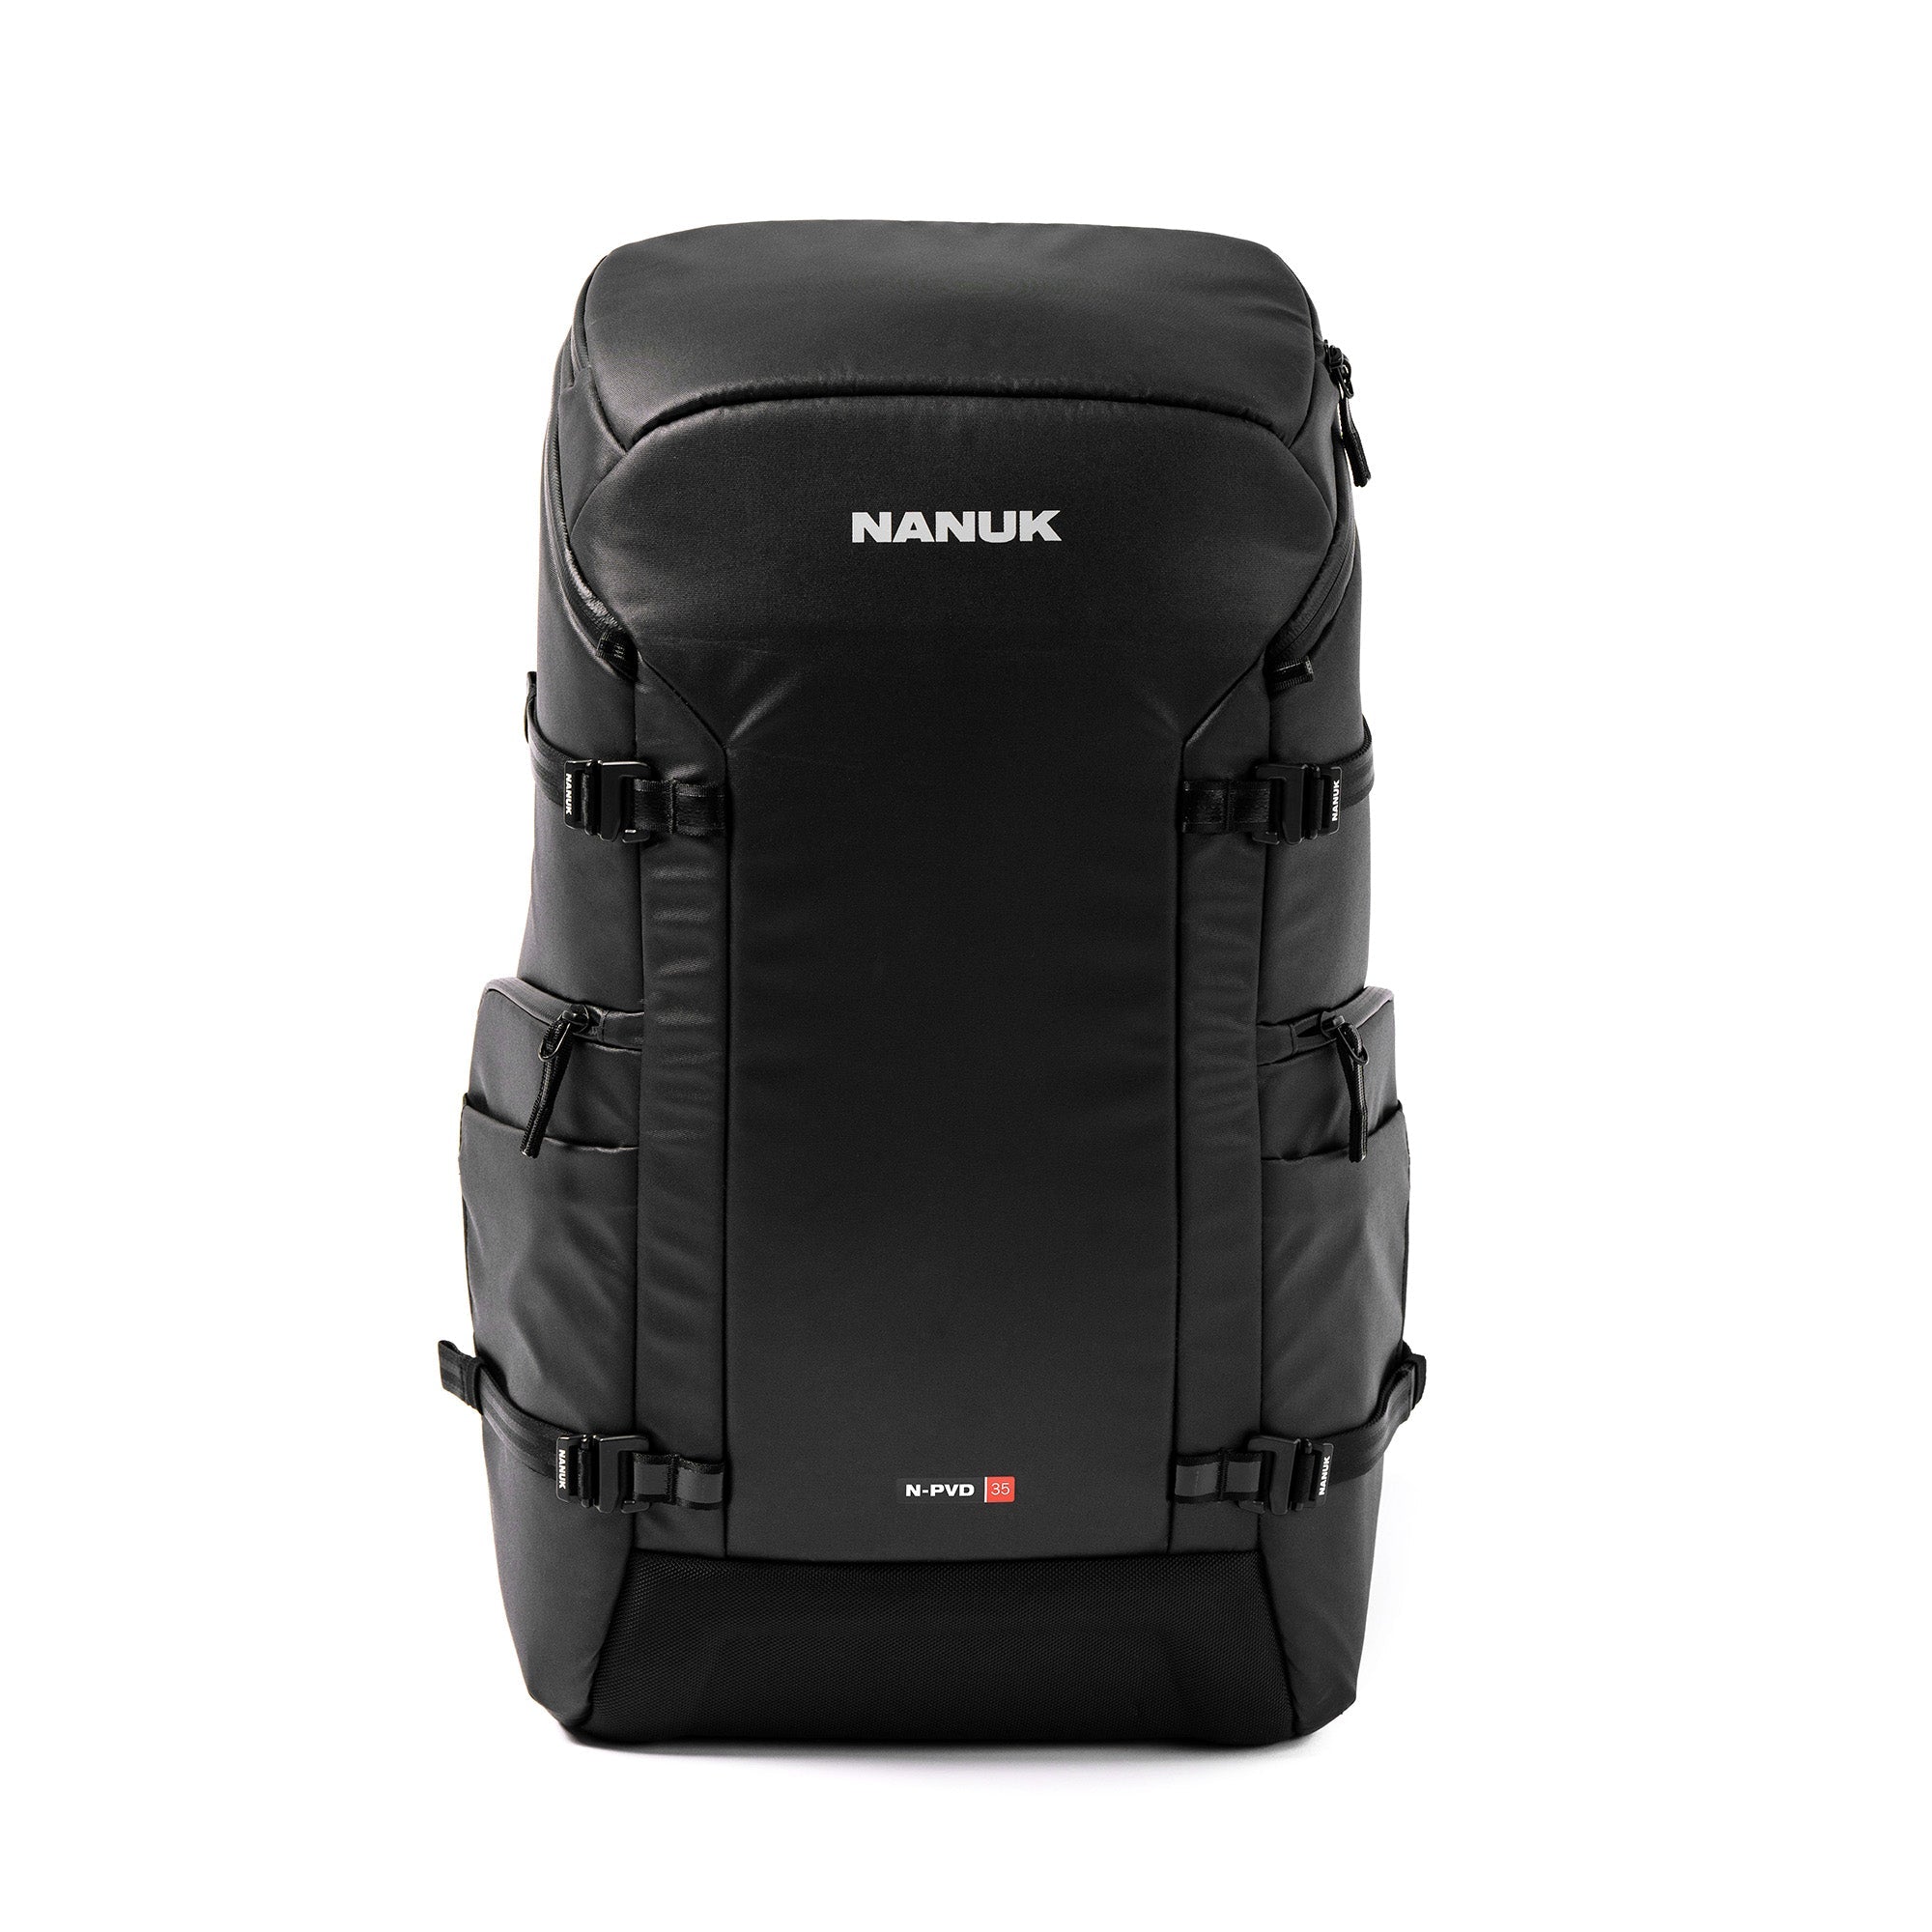 Nanuk N-PVD Backpack for Photo, Video, Drone, and Laptop (Black, 35L)